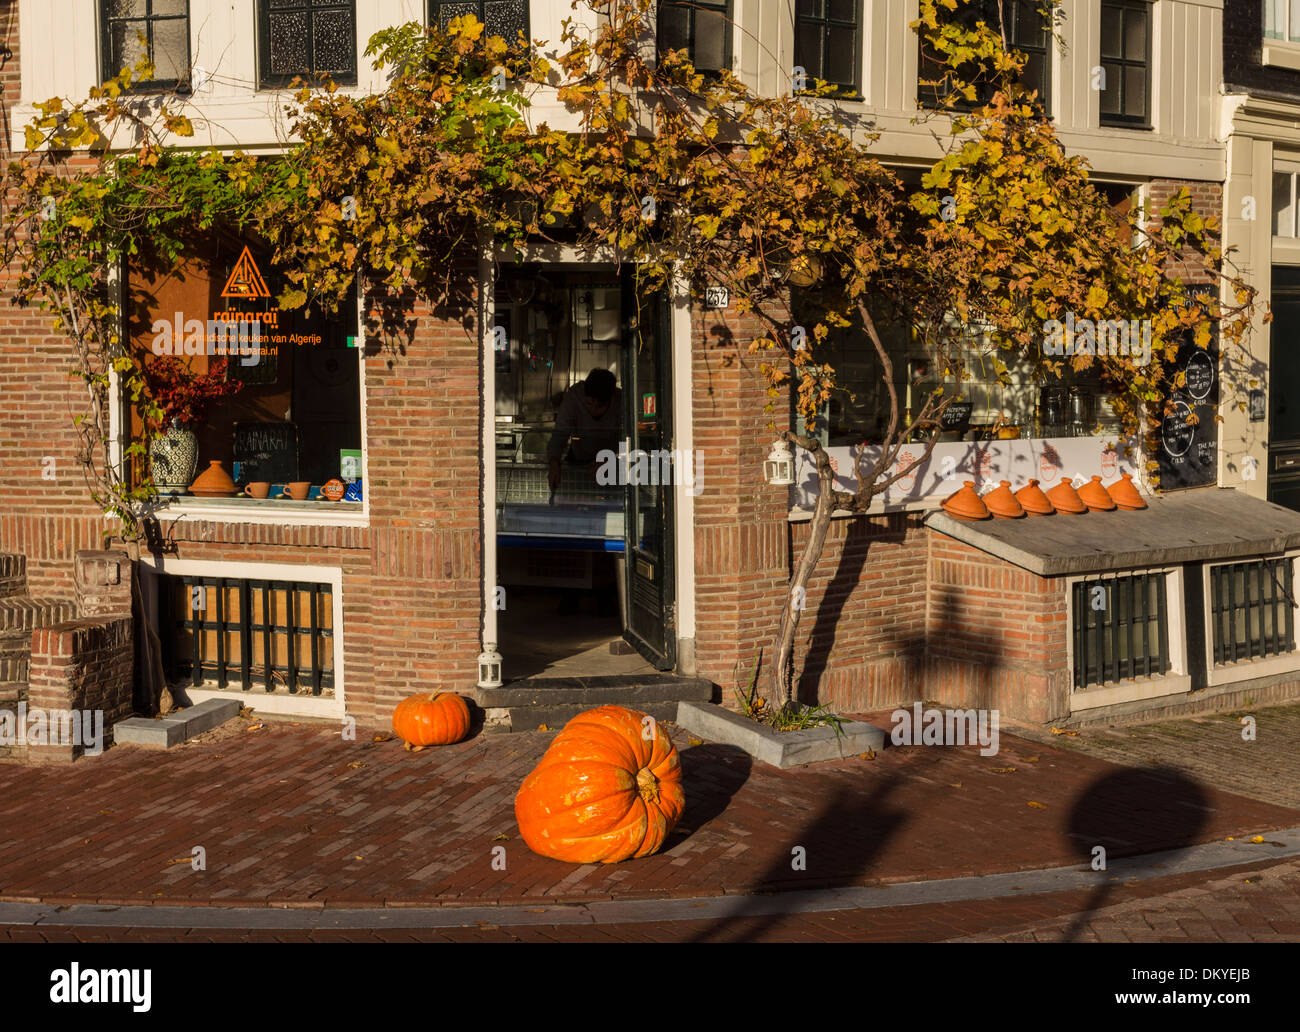 AMSTERDAM RESTAURANT WITH A GRAPE VINE ON THE WALL AND A PUMPKIN ON THE PAVEMENT Stock Photo